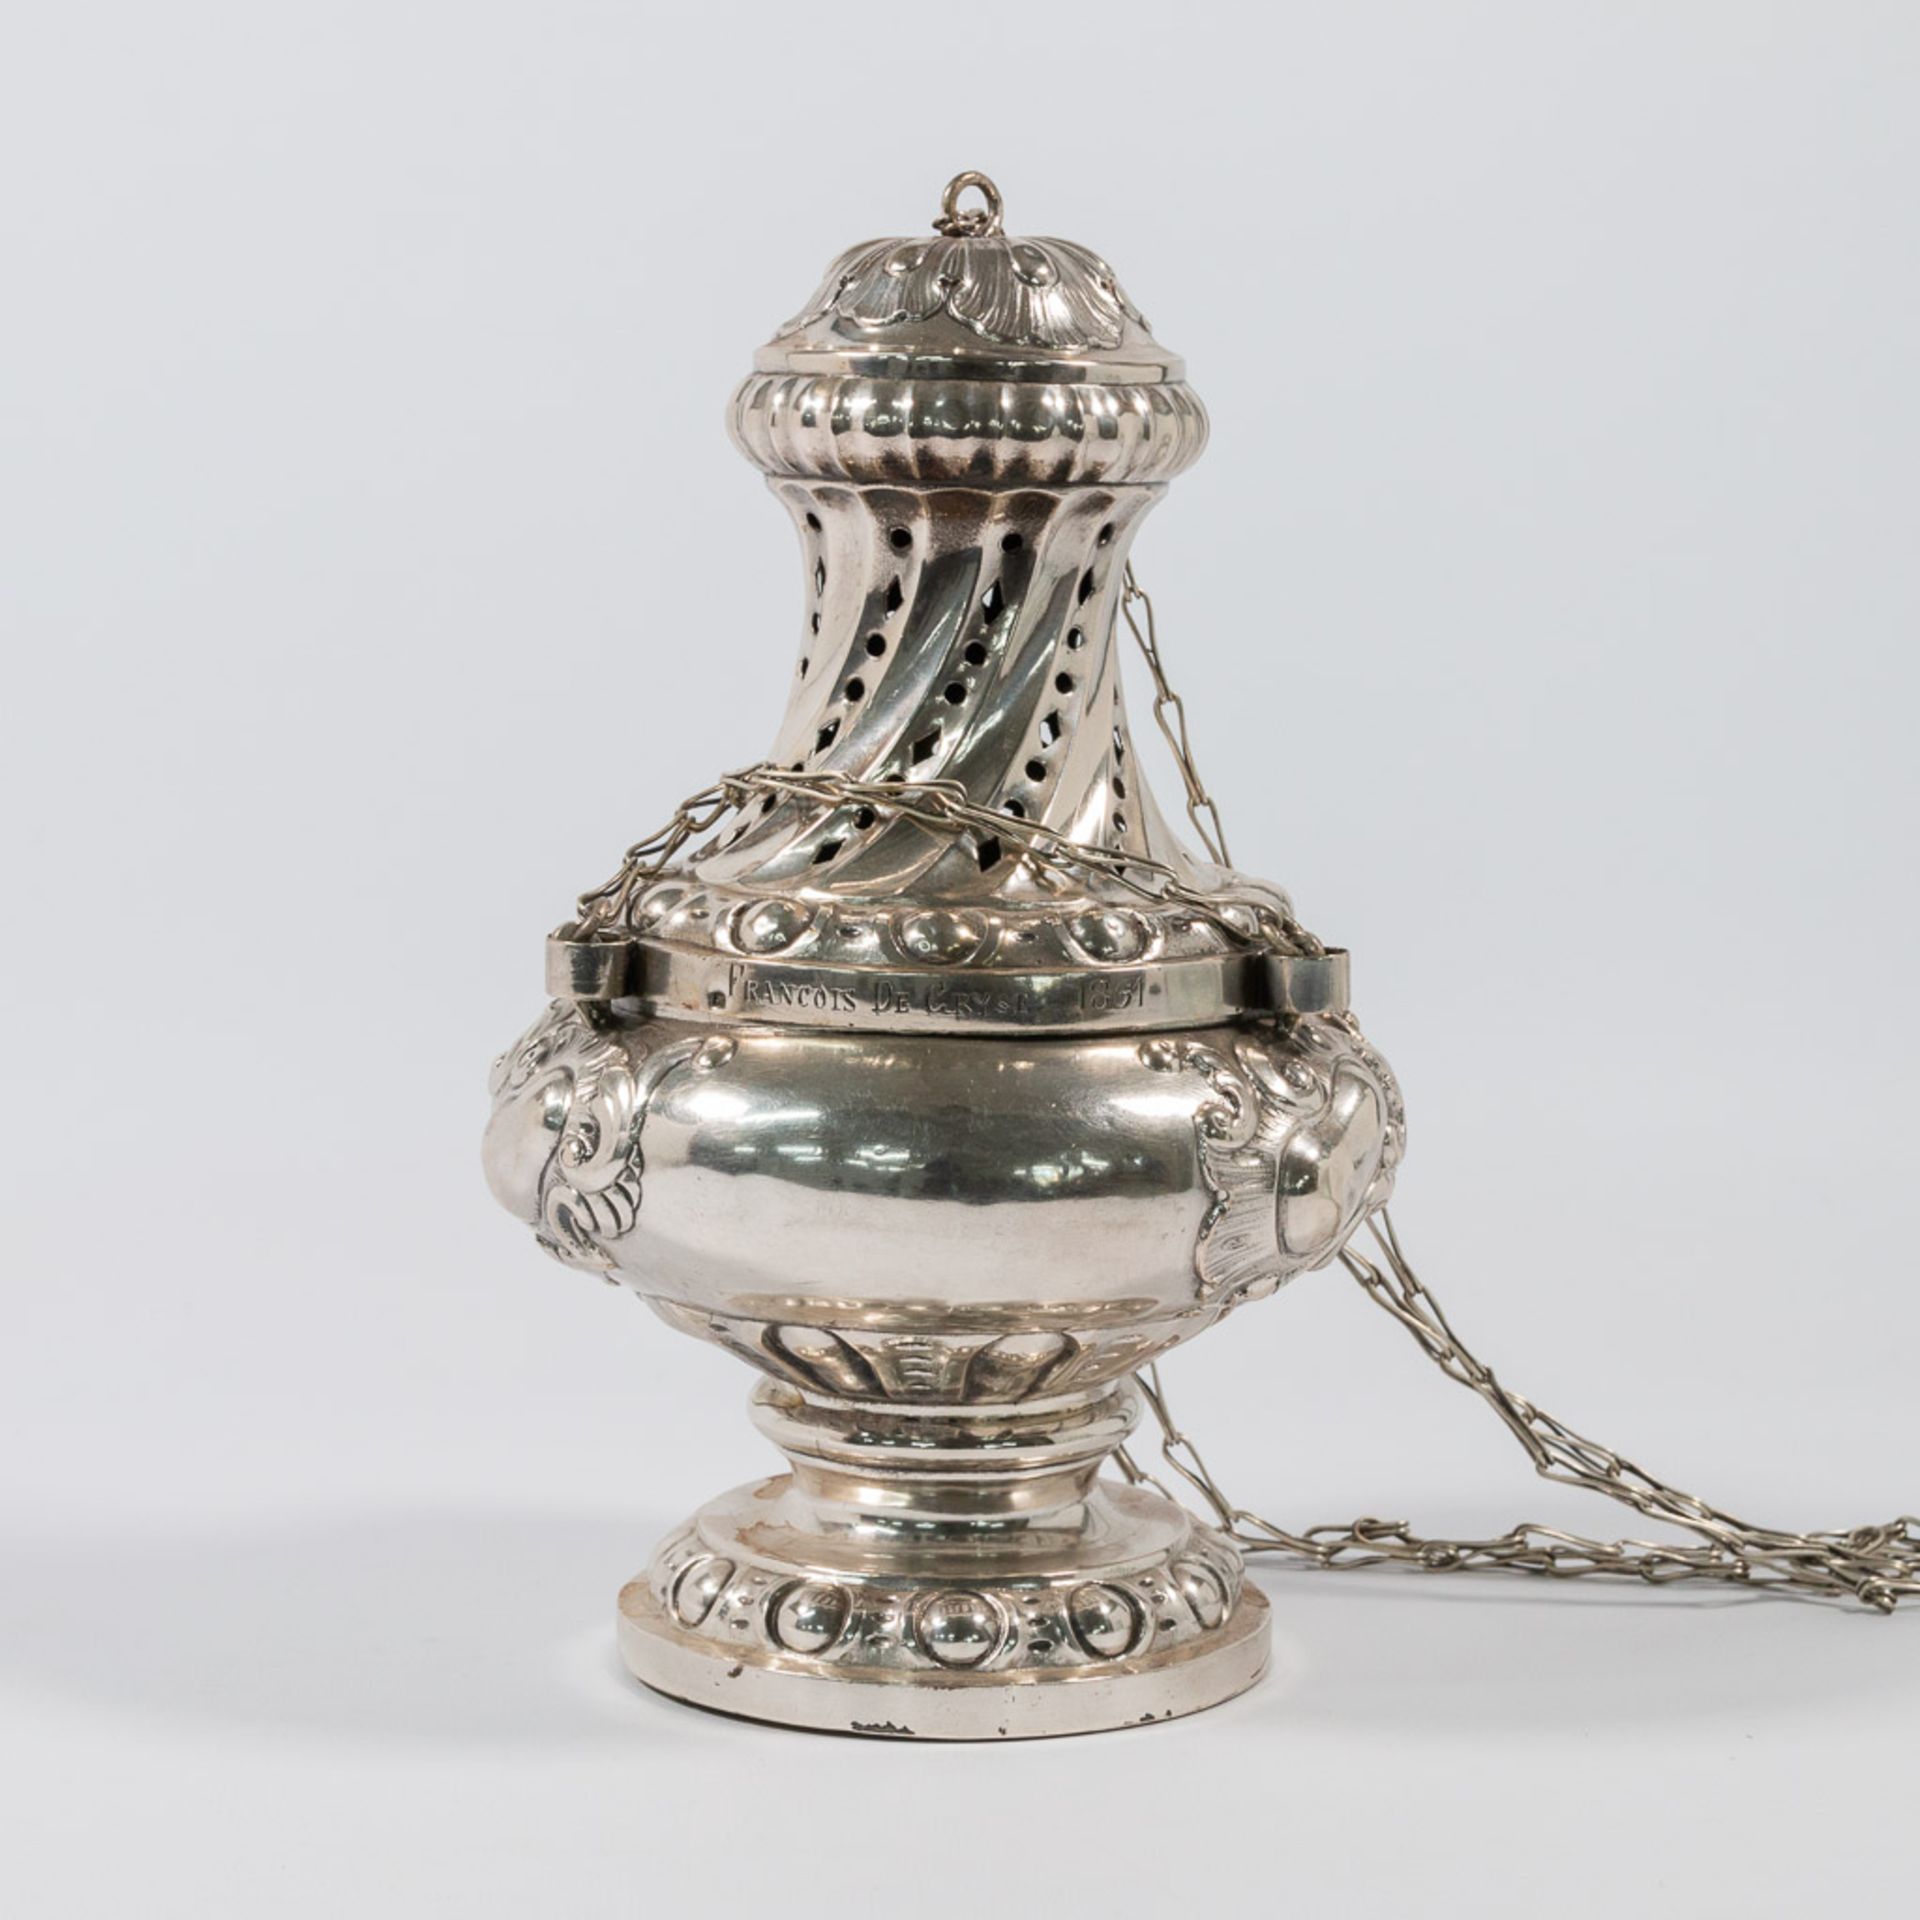 A silver Insence burner and Insence jar. - Image 18 of 39